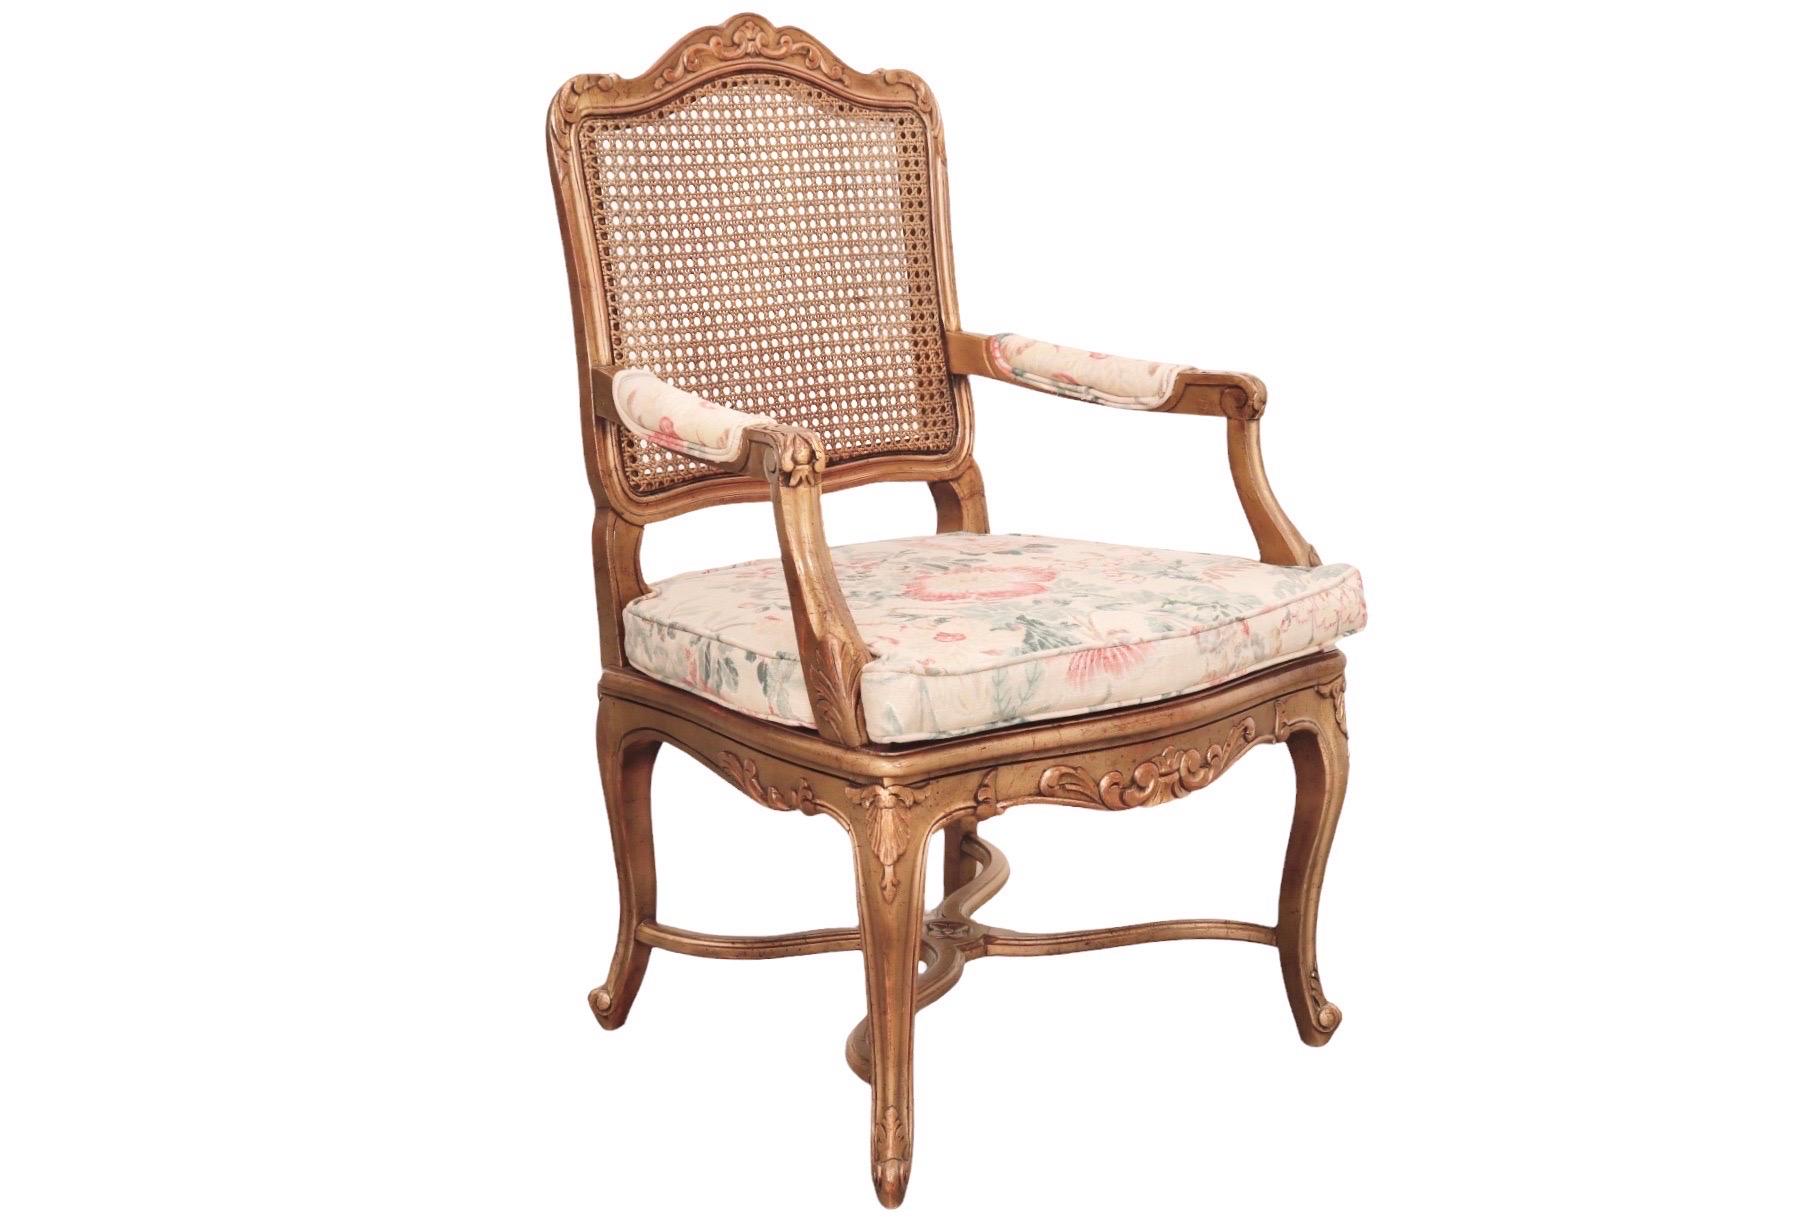 A Louis XV style carved fauteuil with a caned back and seat. The beechwood frame is carved in front and on the crest rail with a scrolled design. Cabriole legs supported with a curule stretcher finish in whorl feet. A loose box cushion and matching